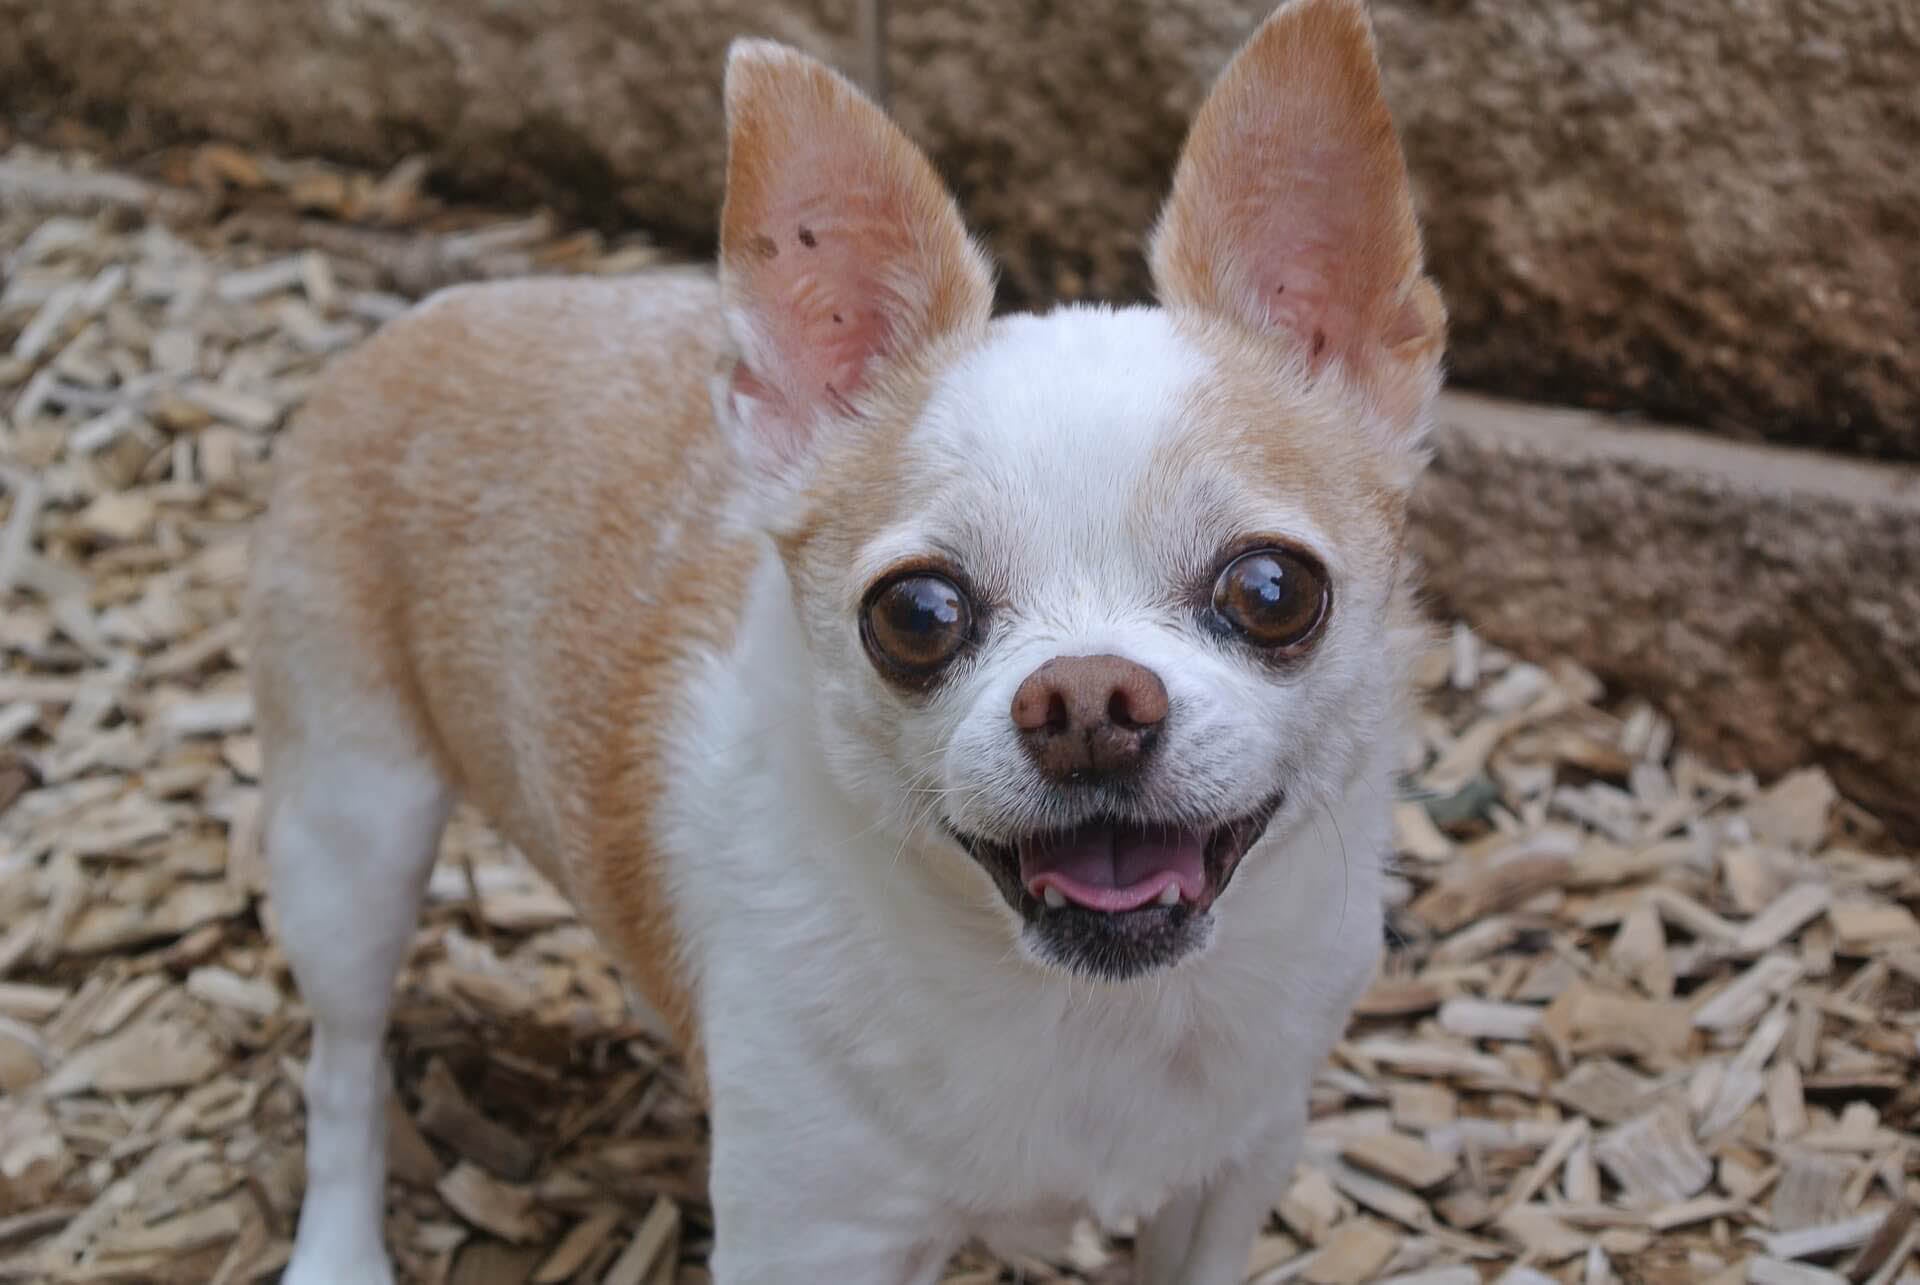 How Do I Know If My Chihuahua Is Happy?